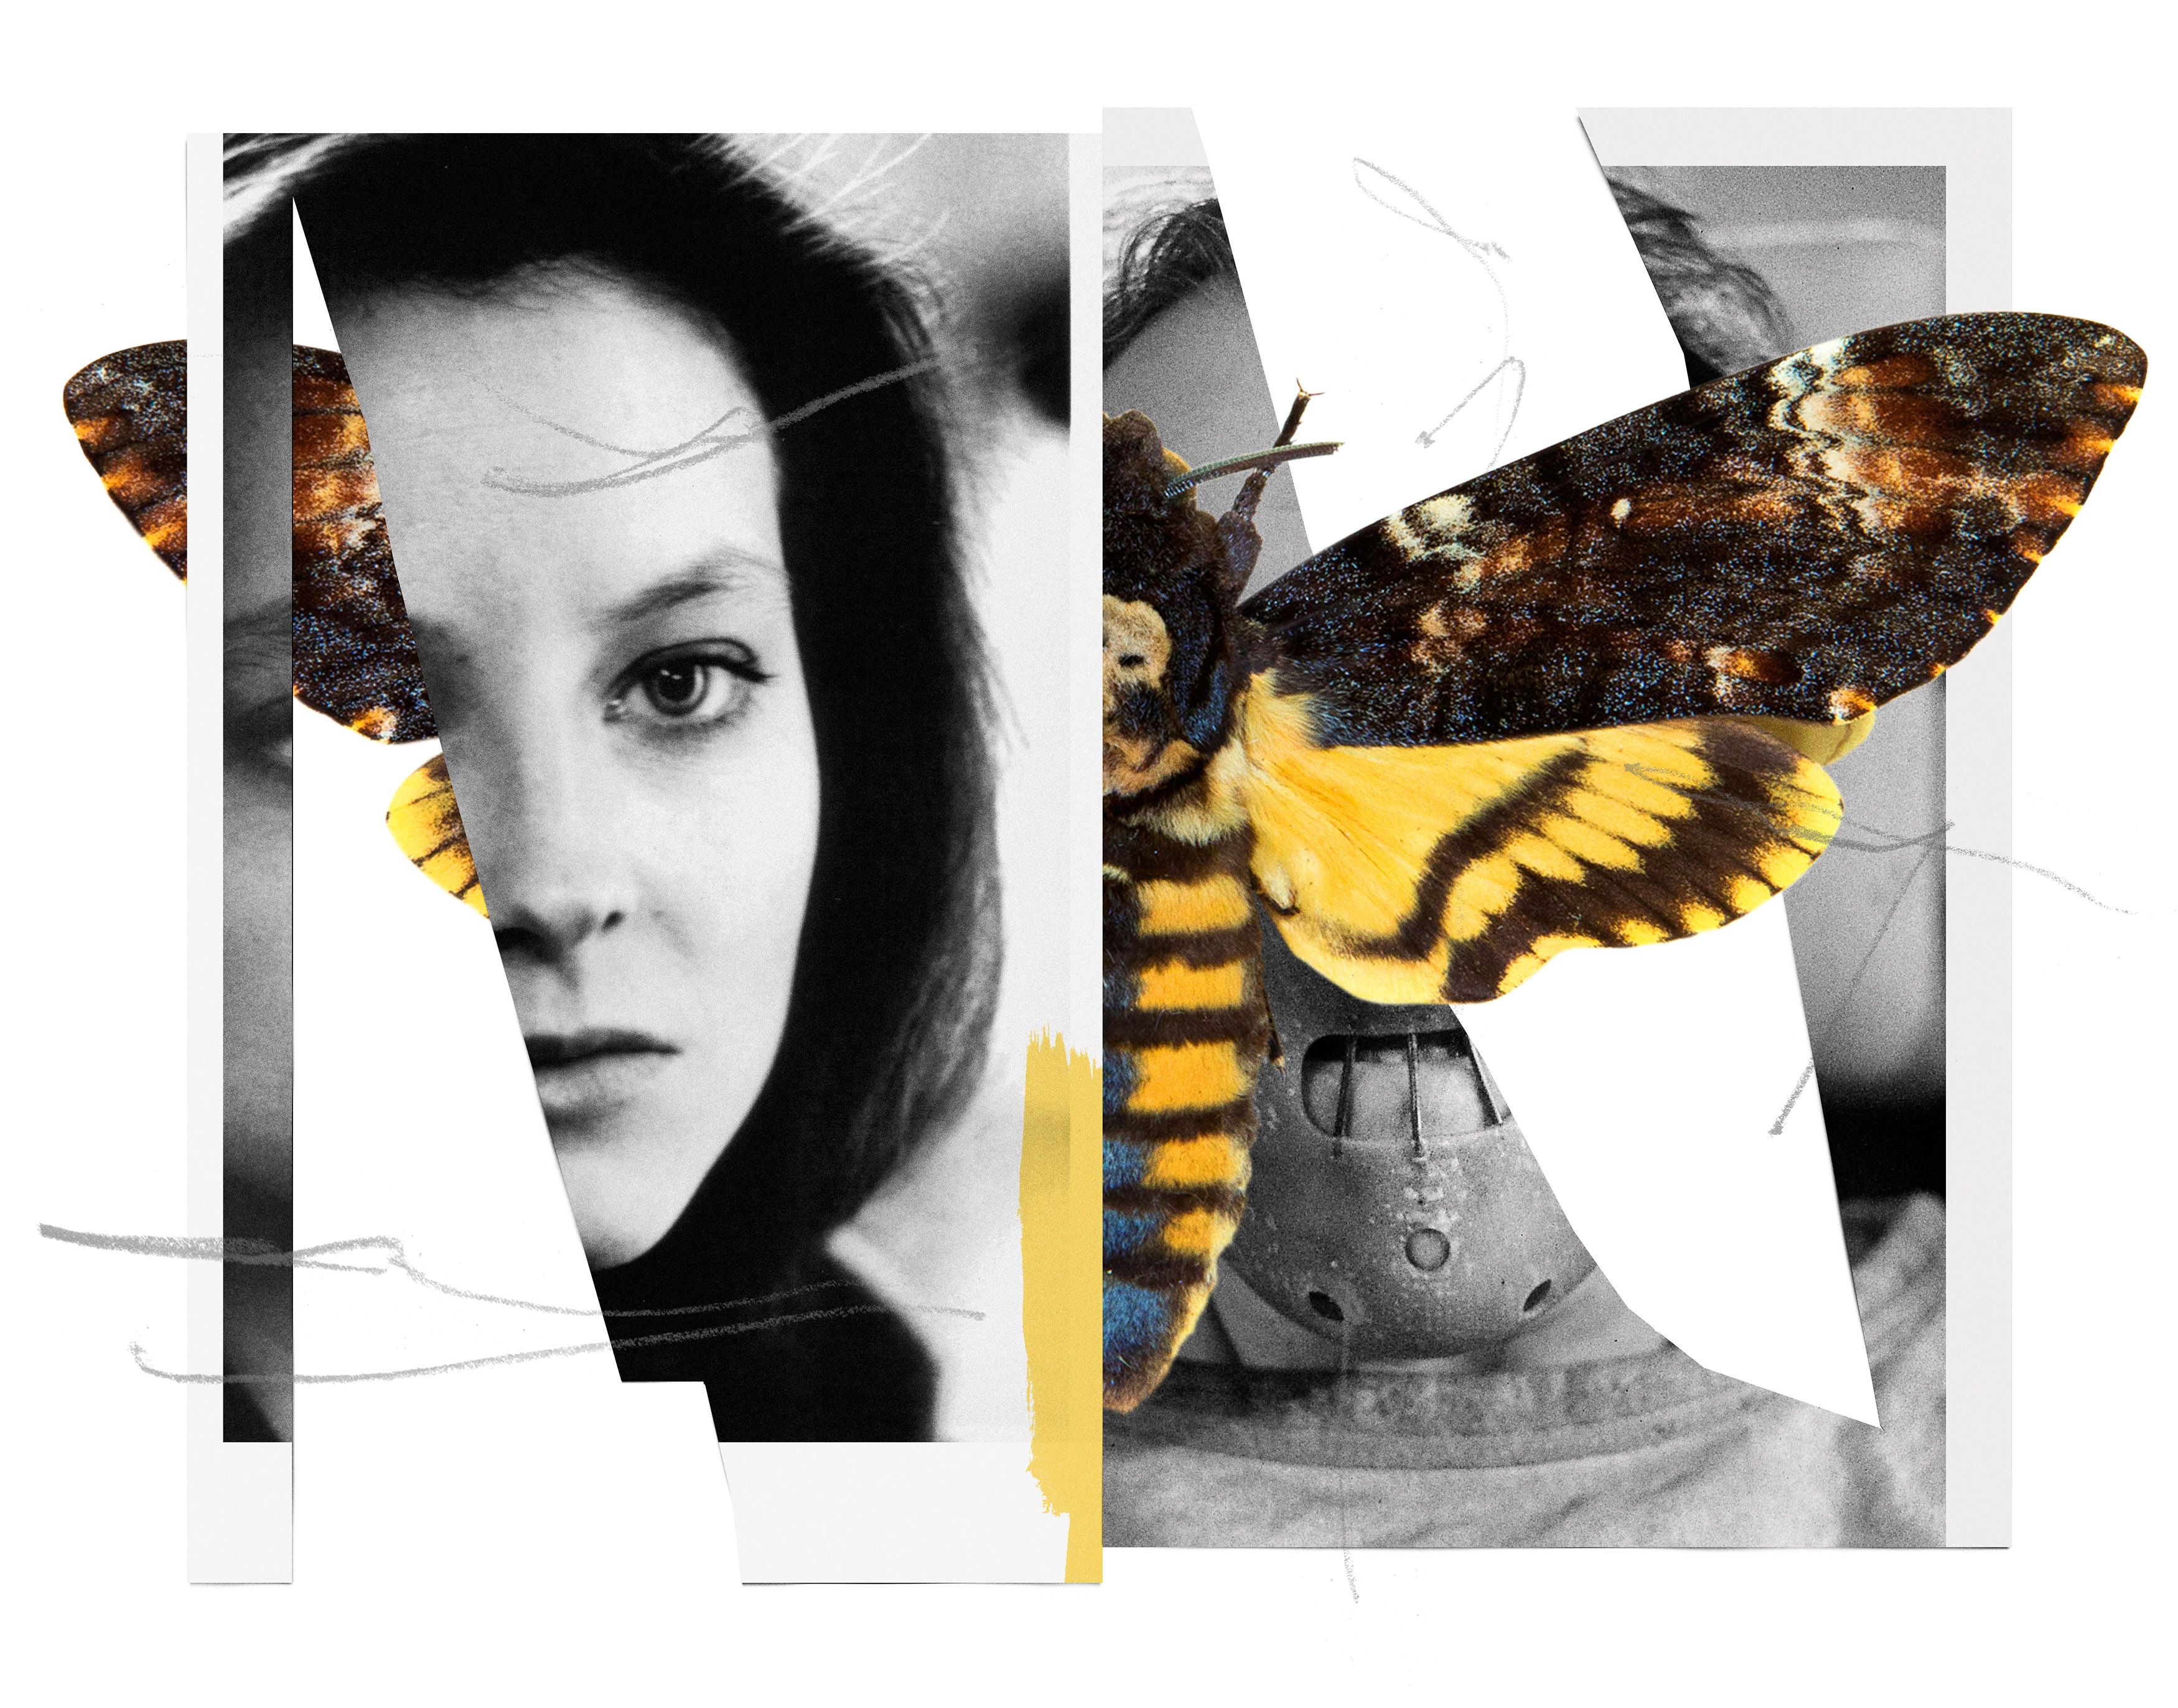 Реферат: The Silence Of The Lambs By Thomas